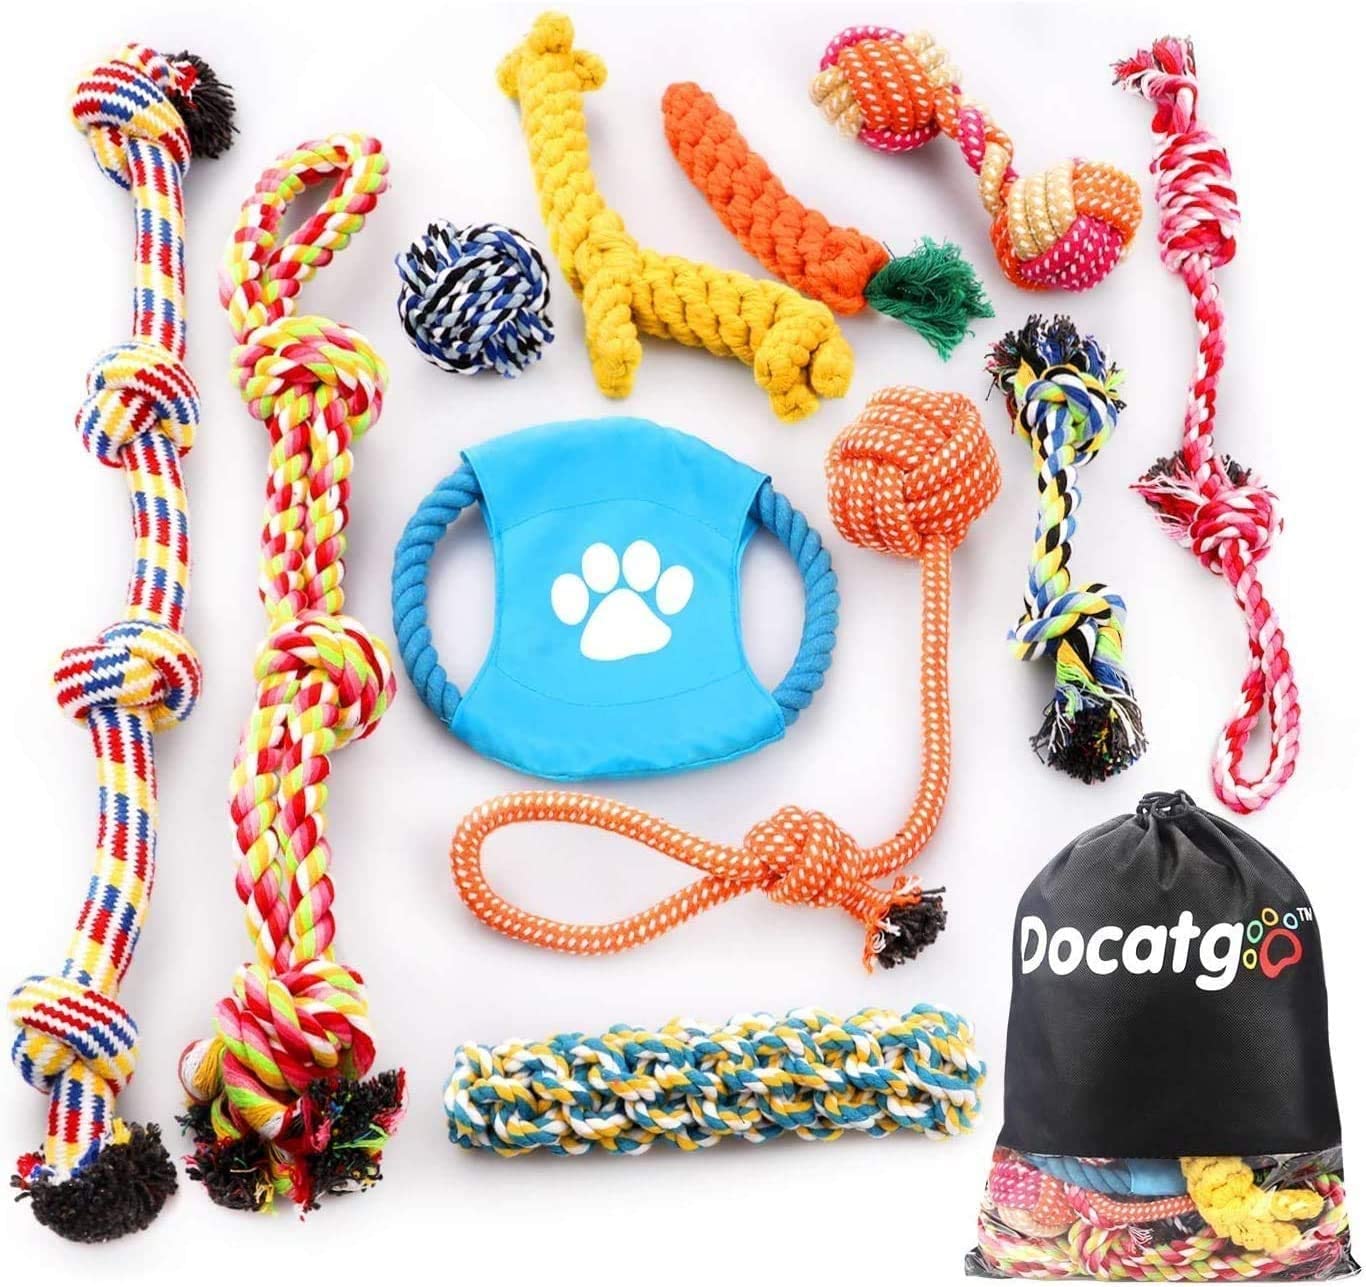 BIG 11 Pack of Very High Quality Rope Dog Toys With Storage Bag $14.99 (reg $30)